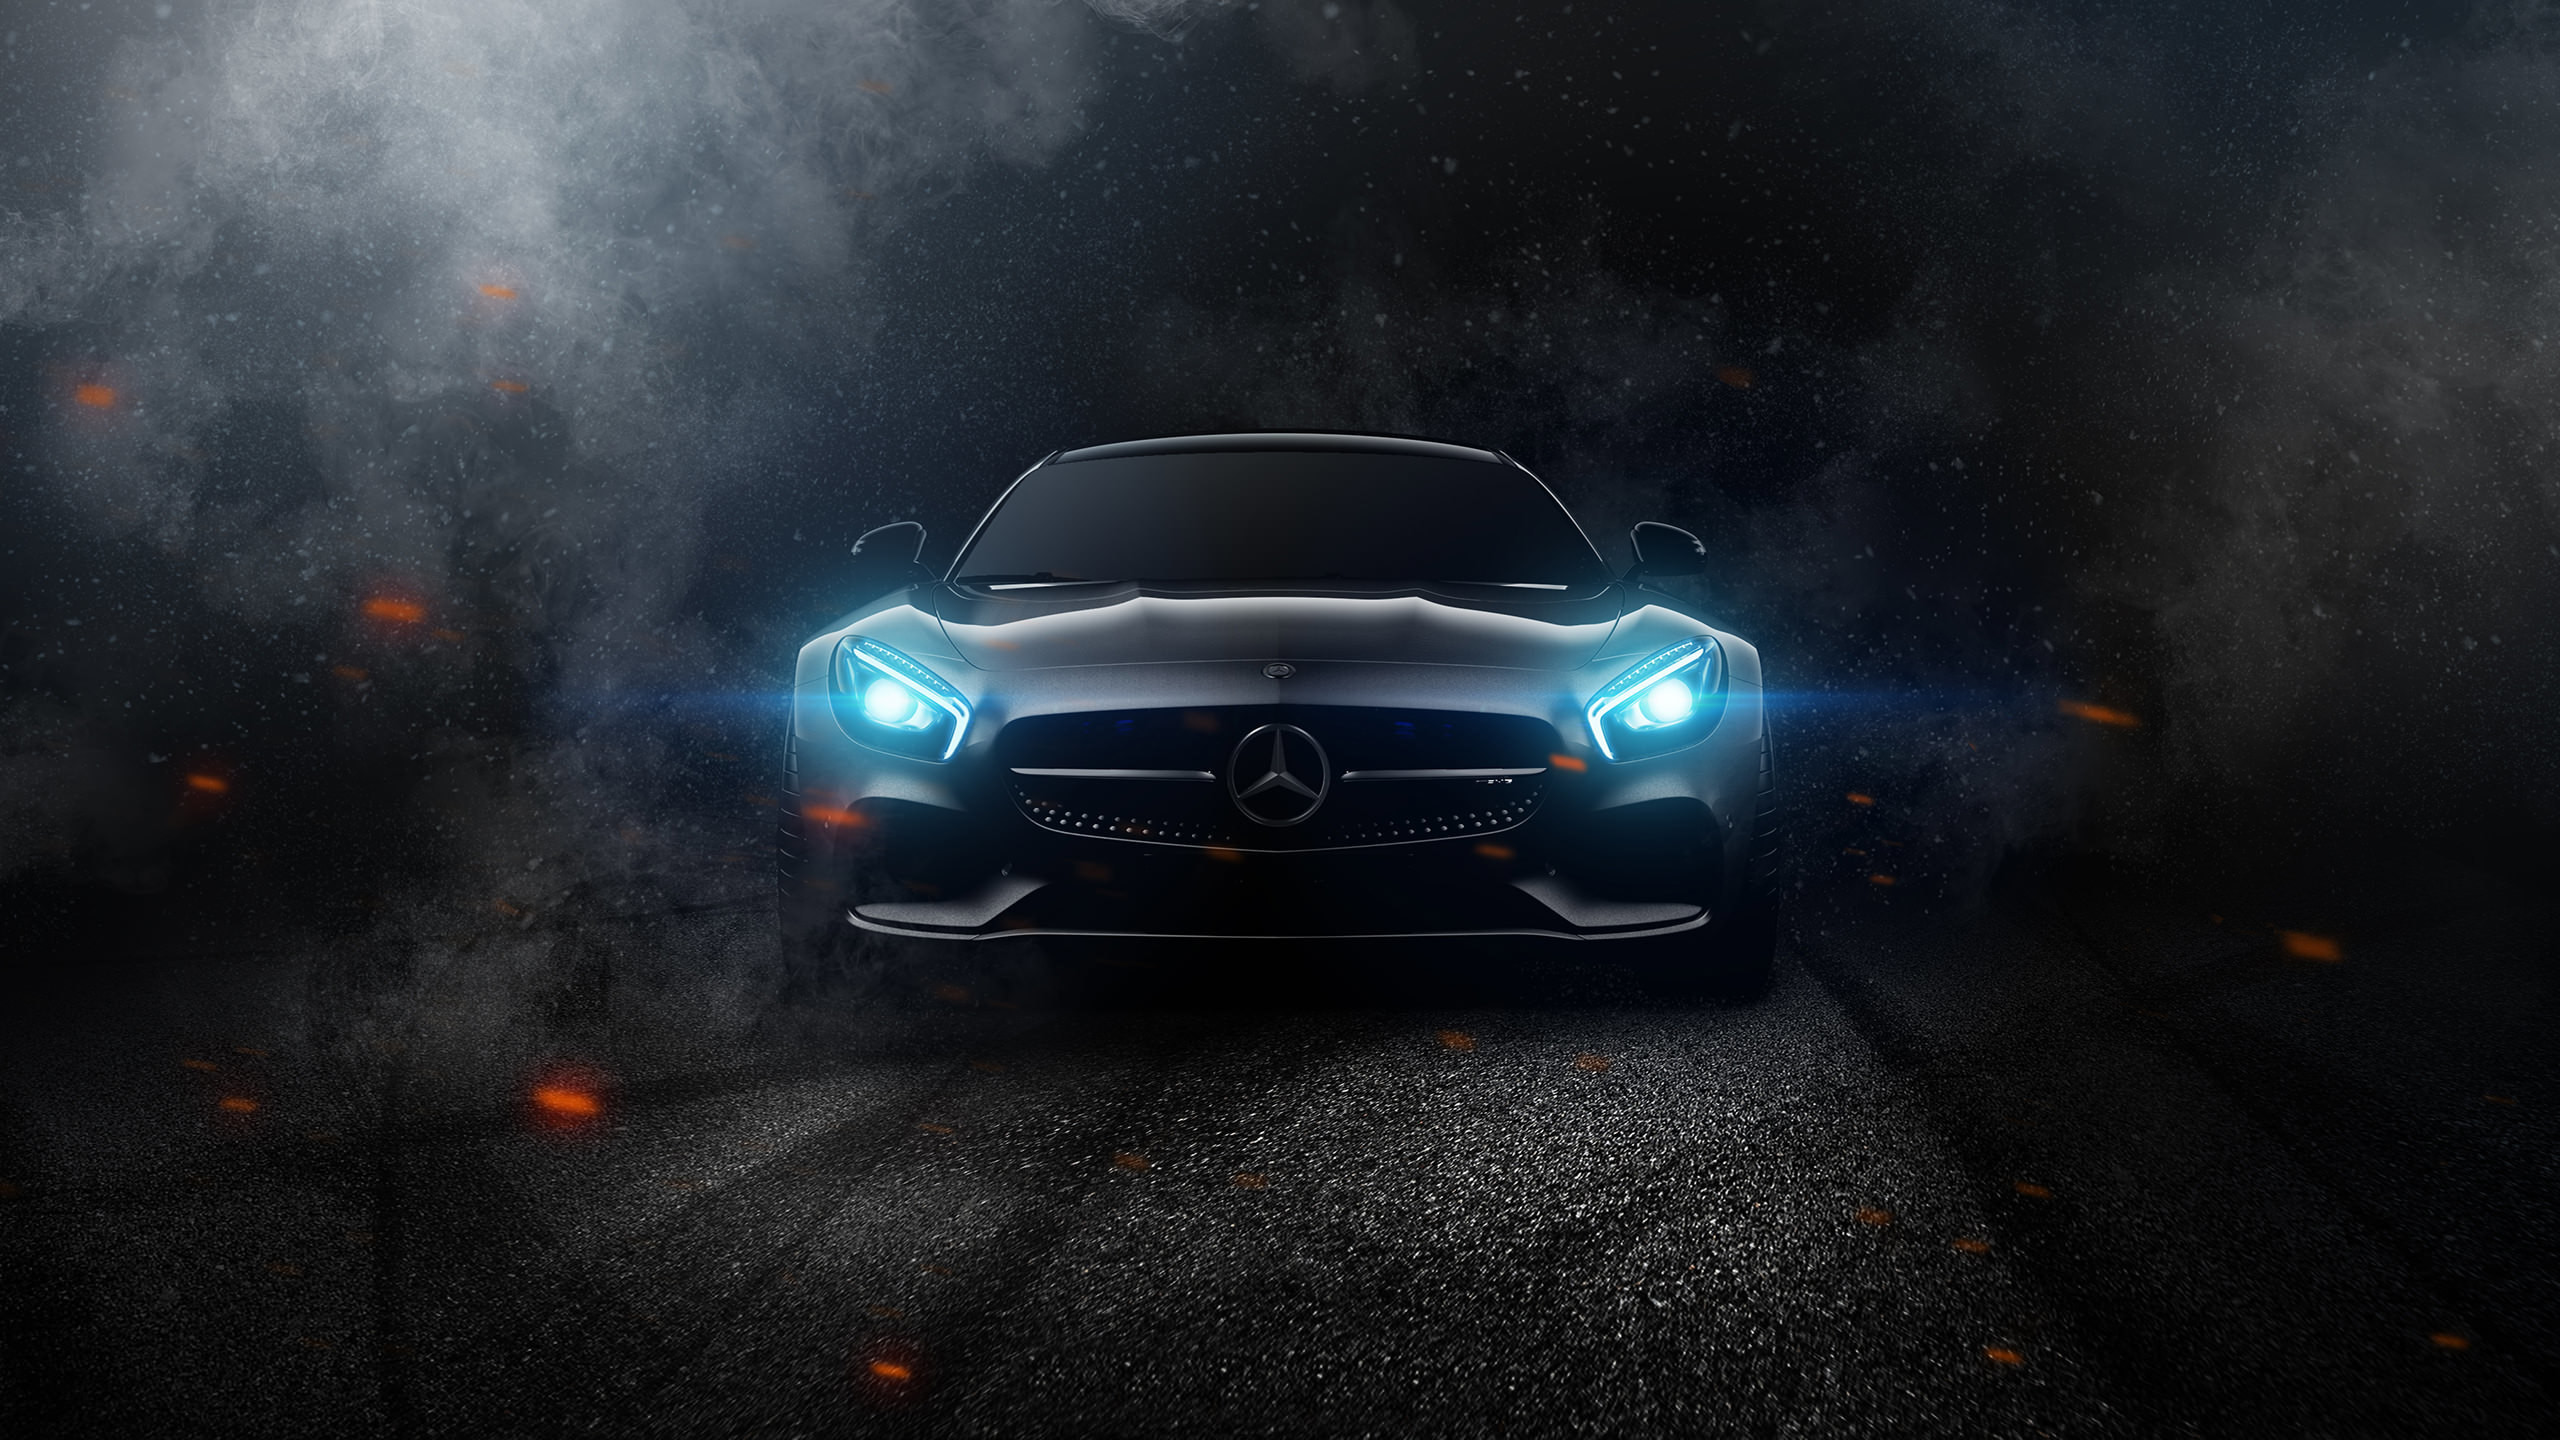 mercedes benz wallpaper for android,land vehicle,vehicle,automotive design,car,sports car